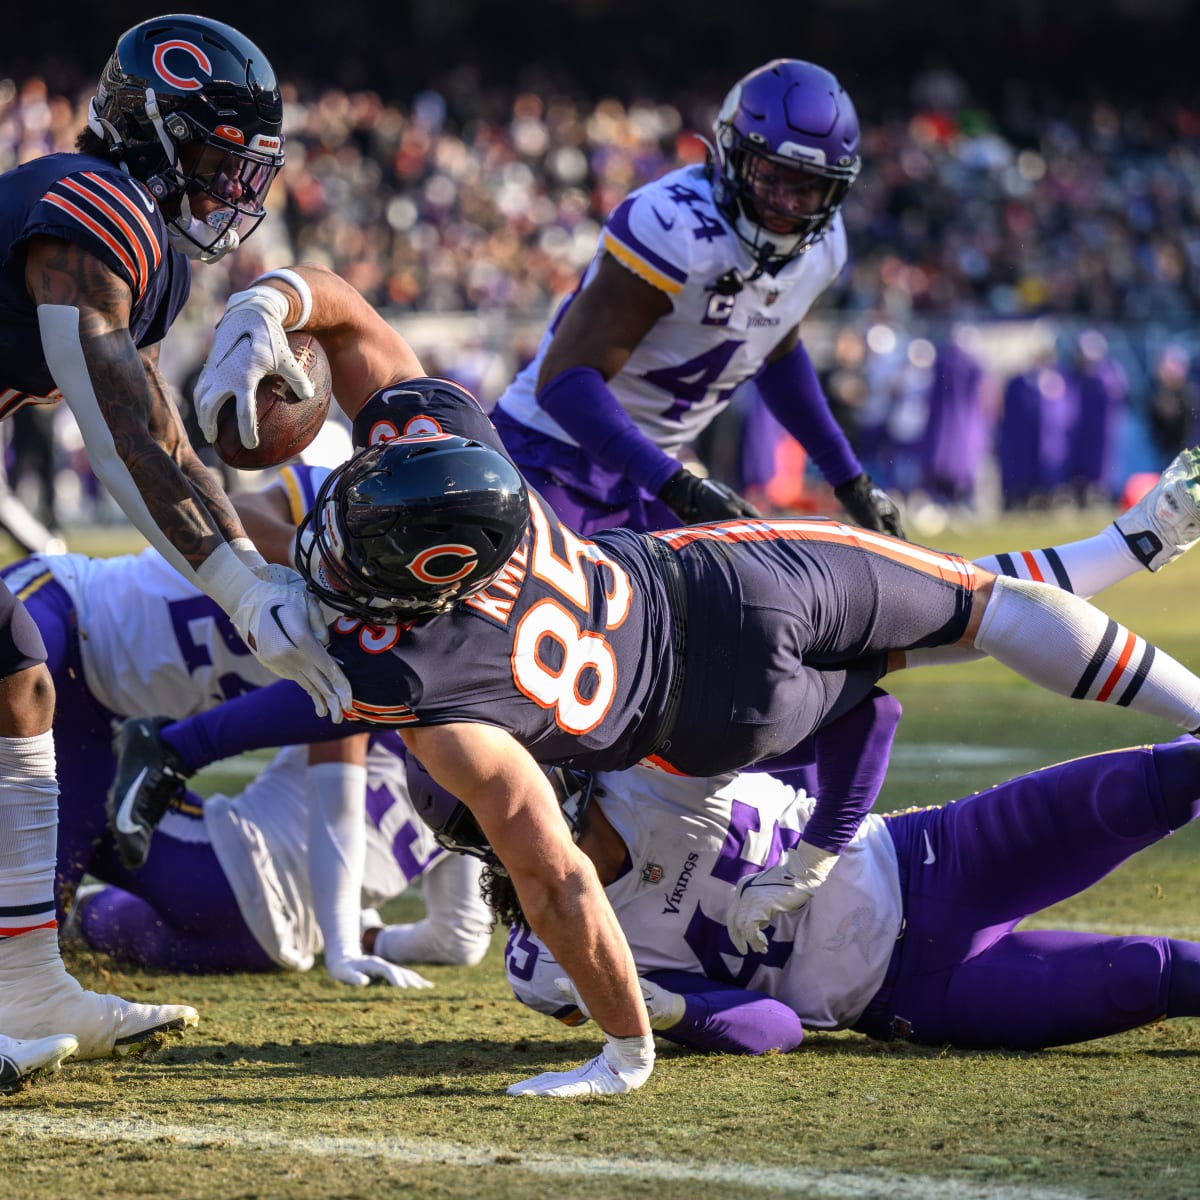 Minnesota Vikings - Chicago Bears: Game time, TV channel and where